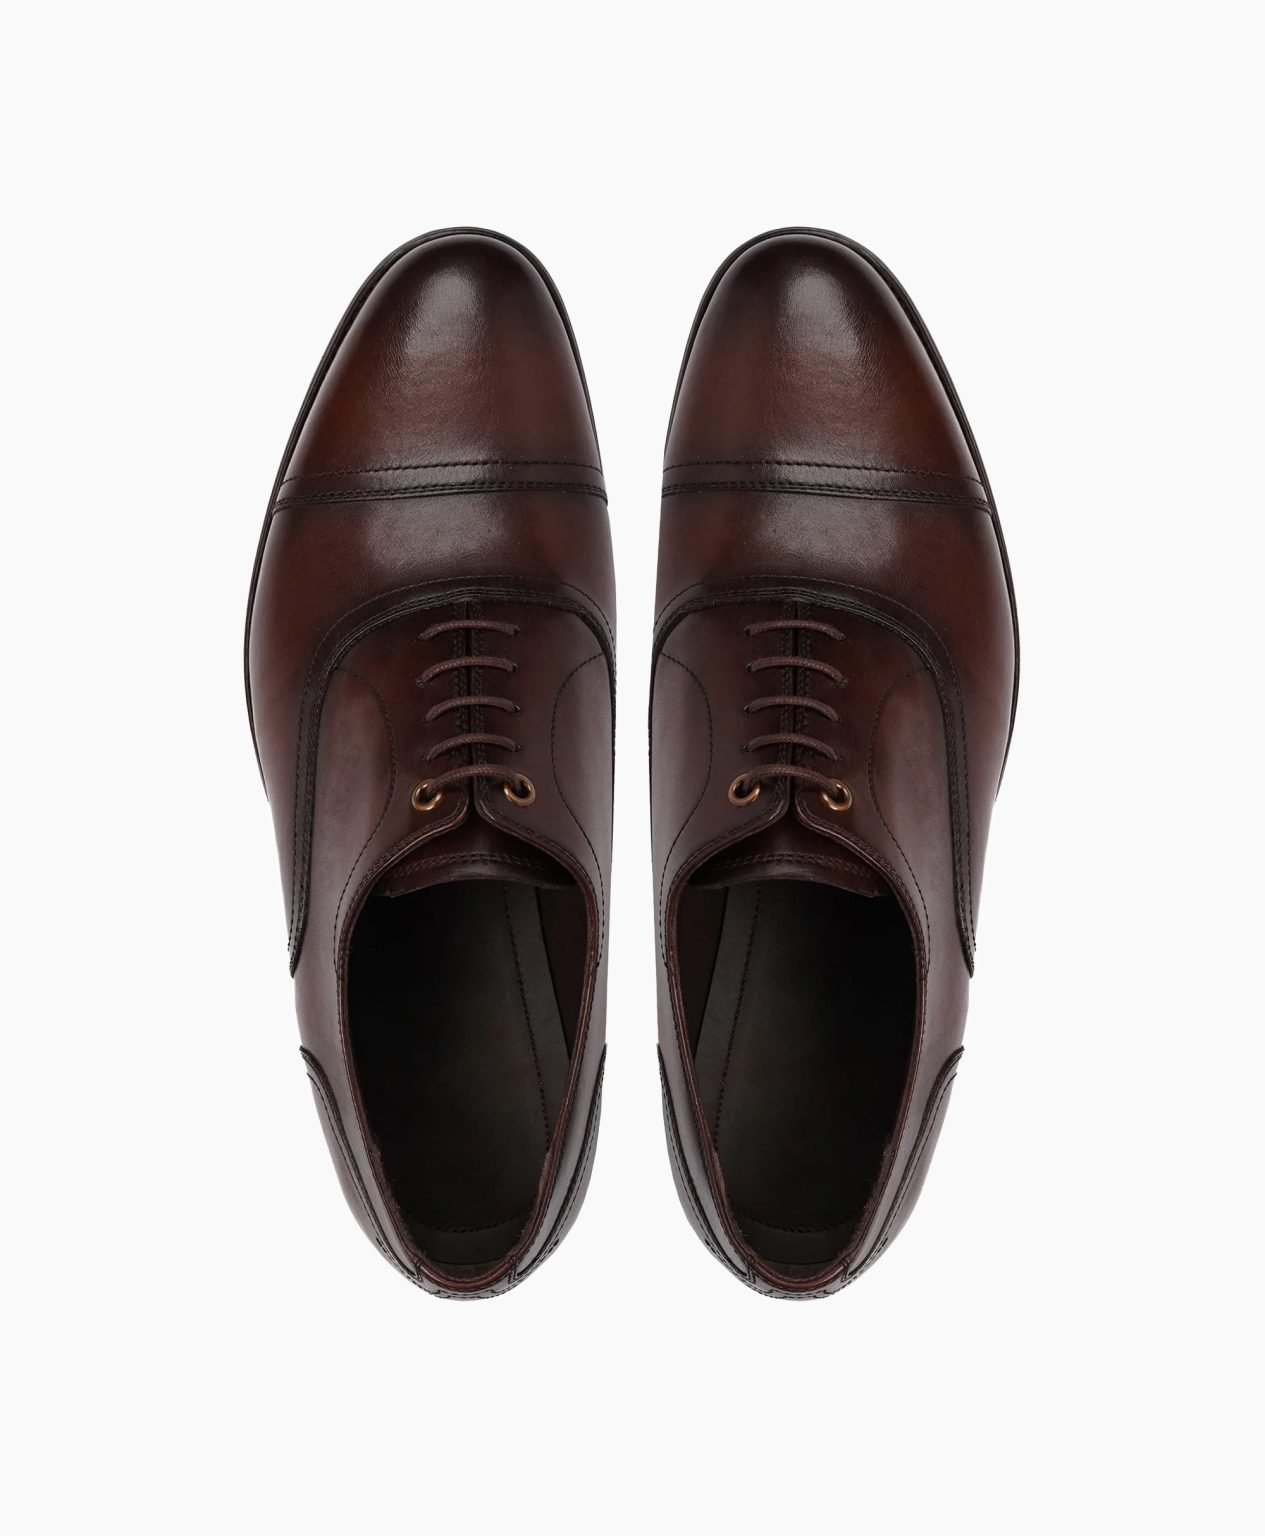 truro-oxford-dark-brown-leather-shoes-image202